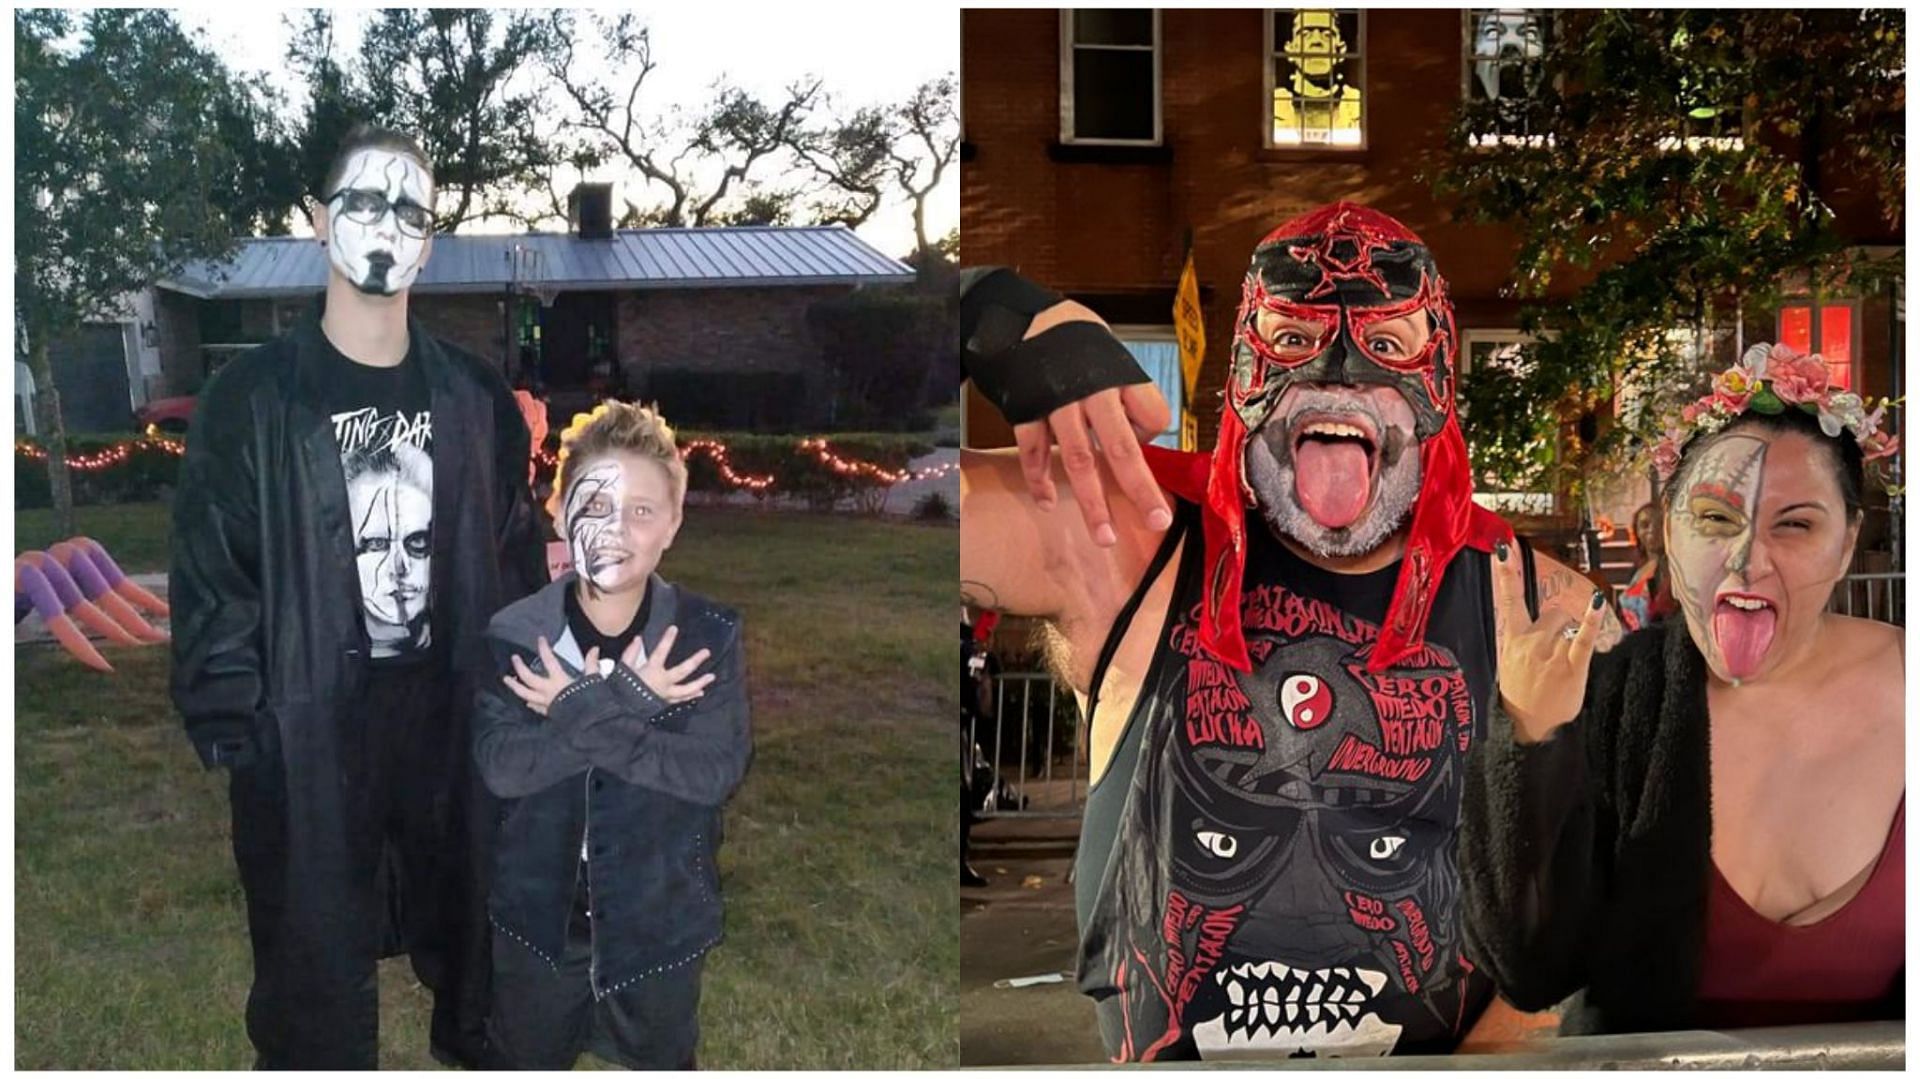 AEW fans dressed up for Halloween 2021